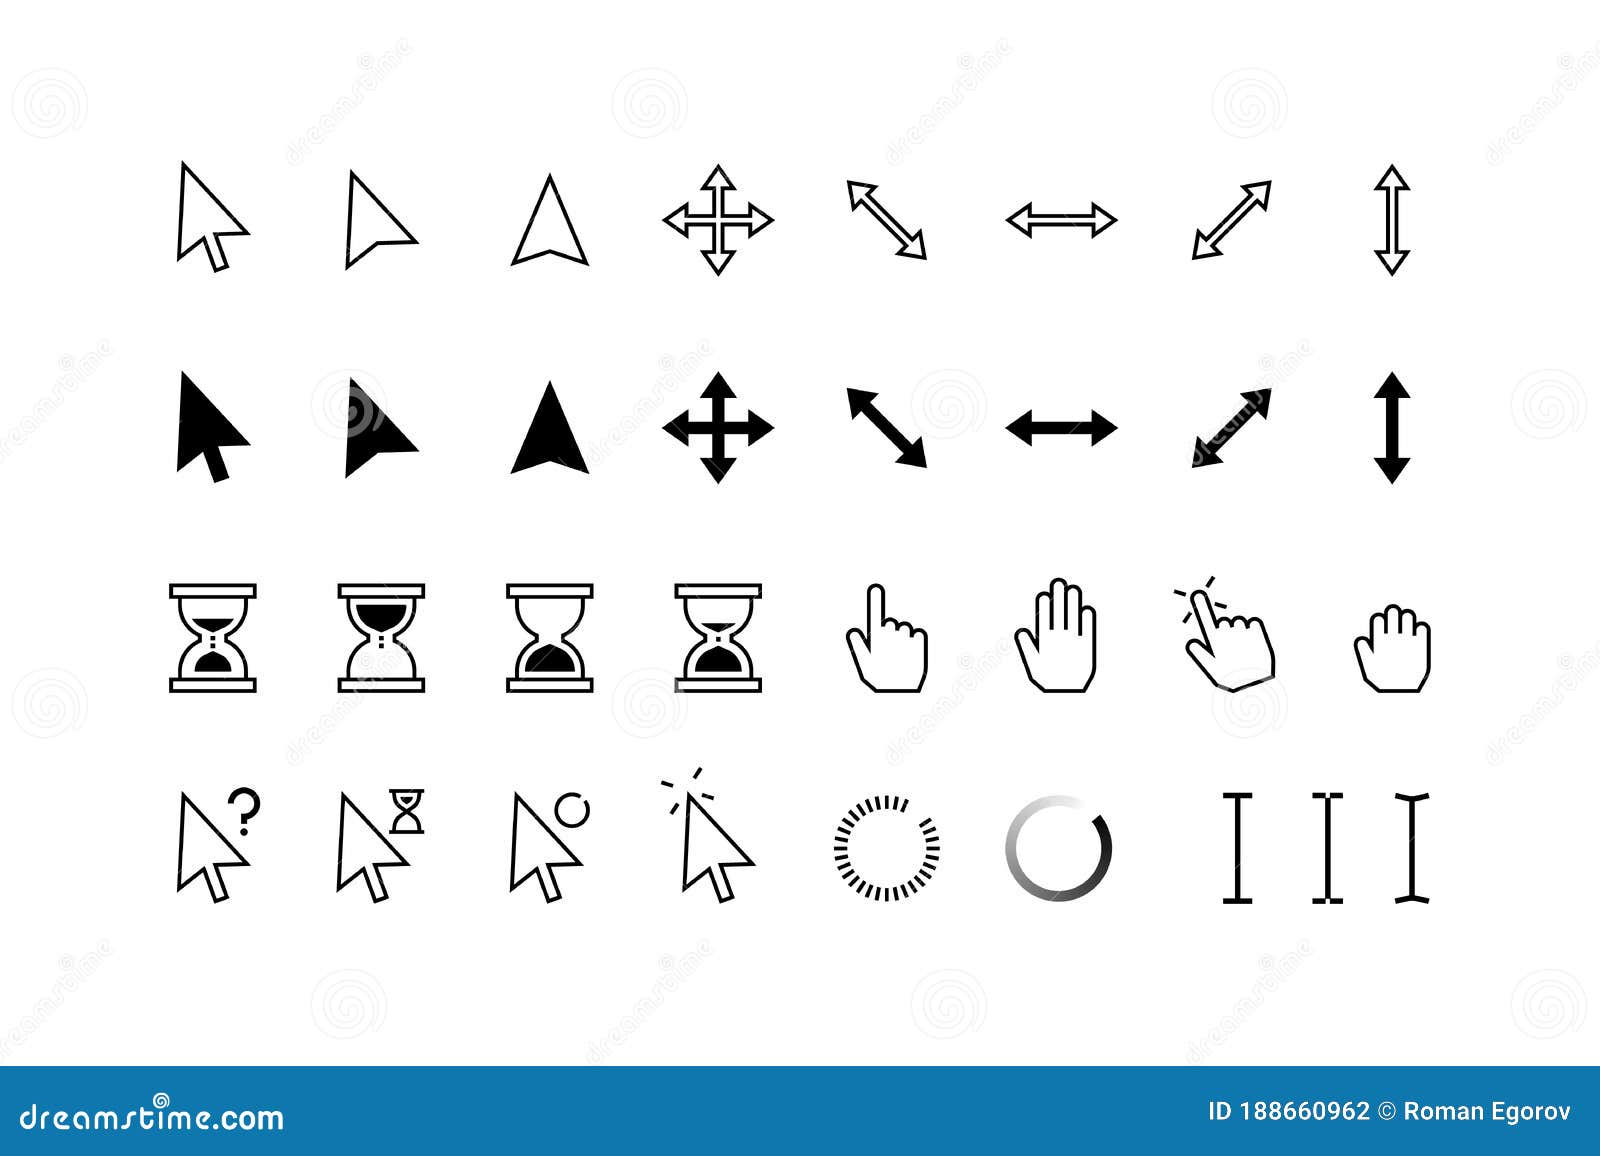 Gaming Cursor Vector Art, Icons, and Graphics for Free Download